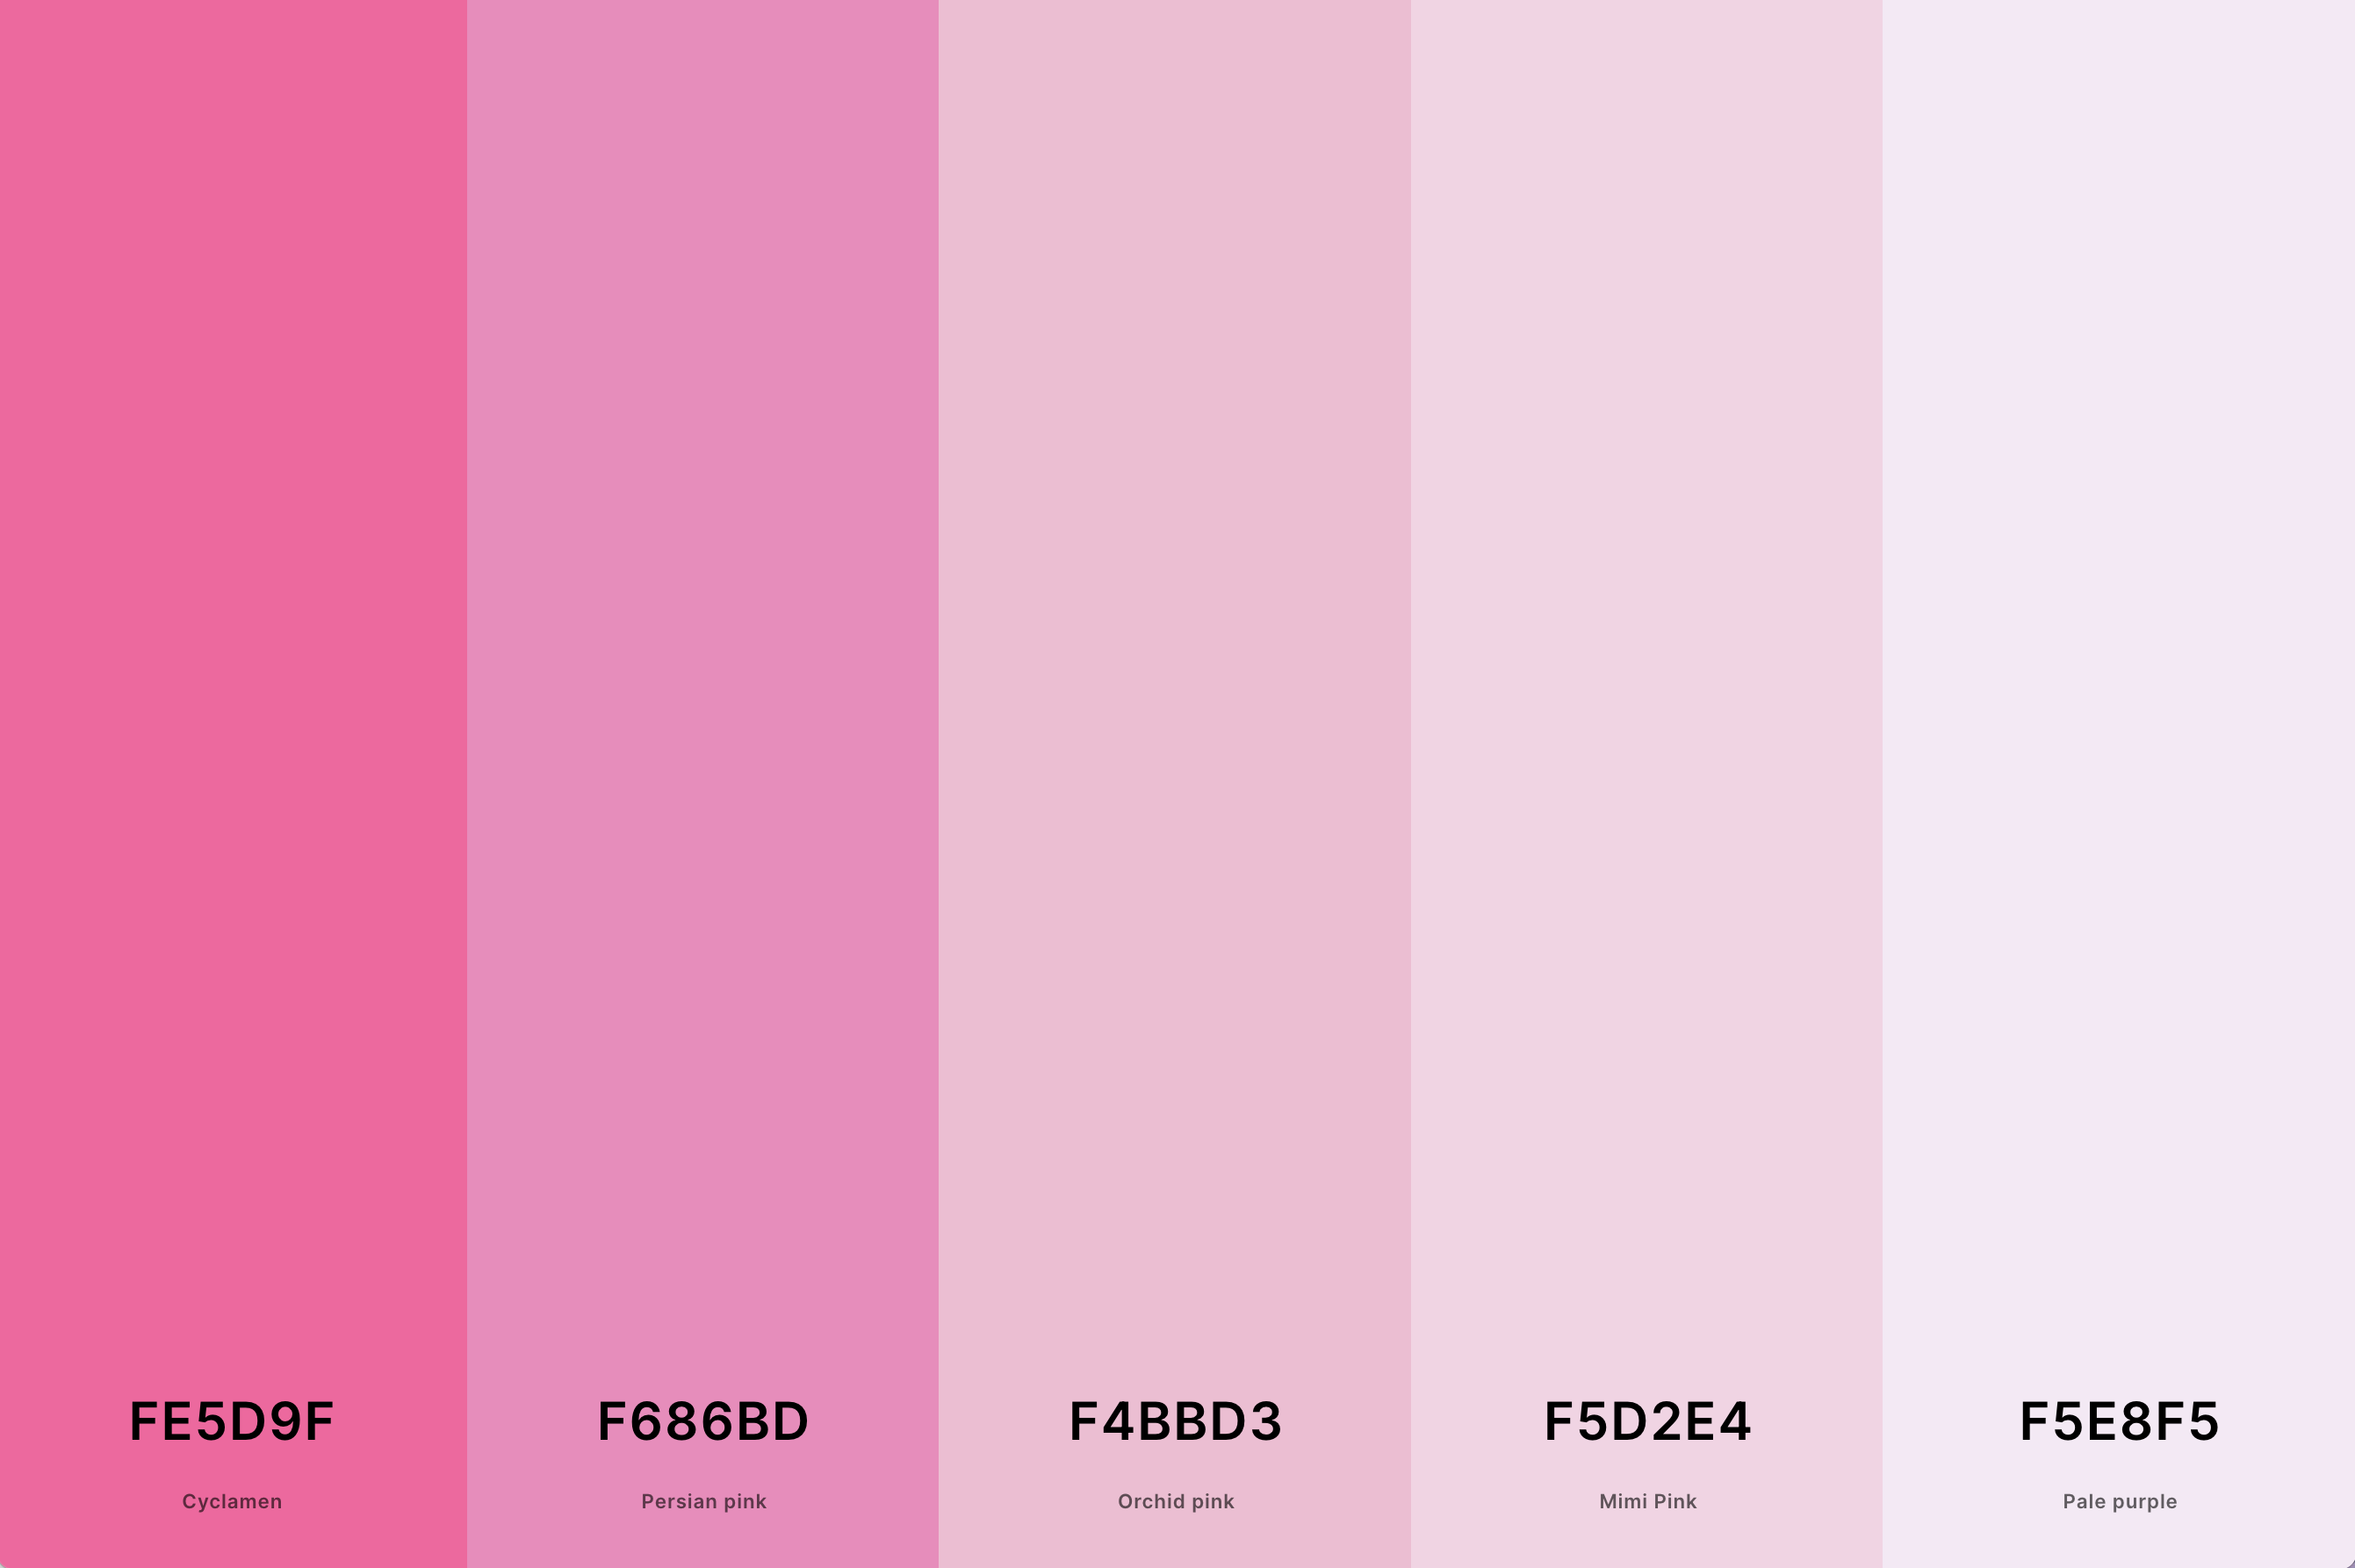 22. Pink And White Color Palette Color Palette with Cyclamen (Hex #FE5D9F) + Persian Pink (Hex #F686BD) + Orchid Pink (Hex #F4BBD3) + Mimi Pink (Hex #F5D2E4) + Pale Purple (Hex #F5E8F5) Color Palette with Hex Codes